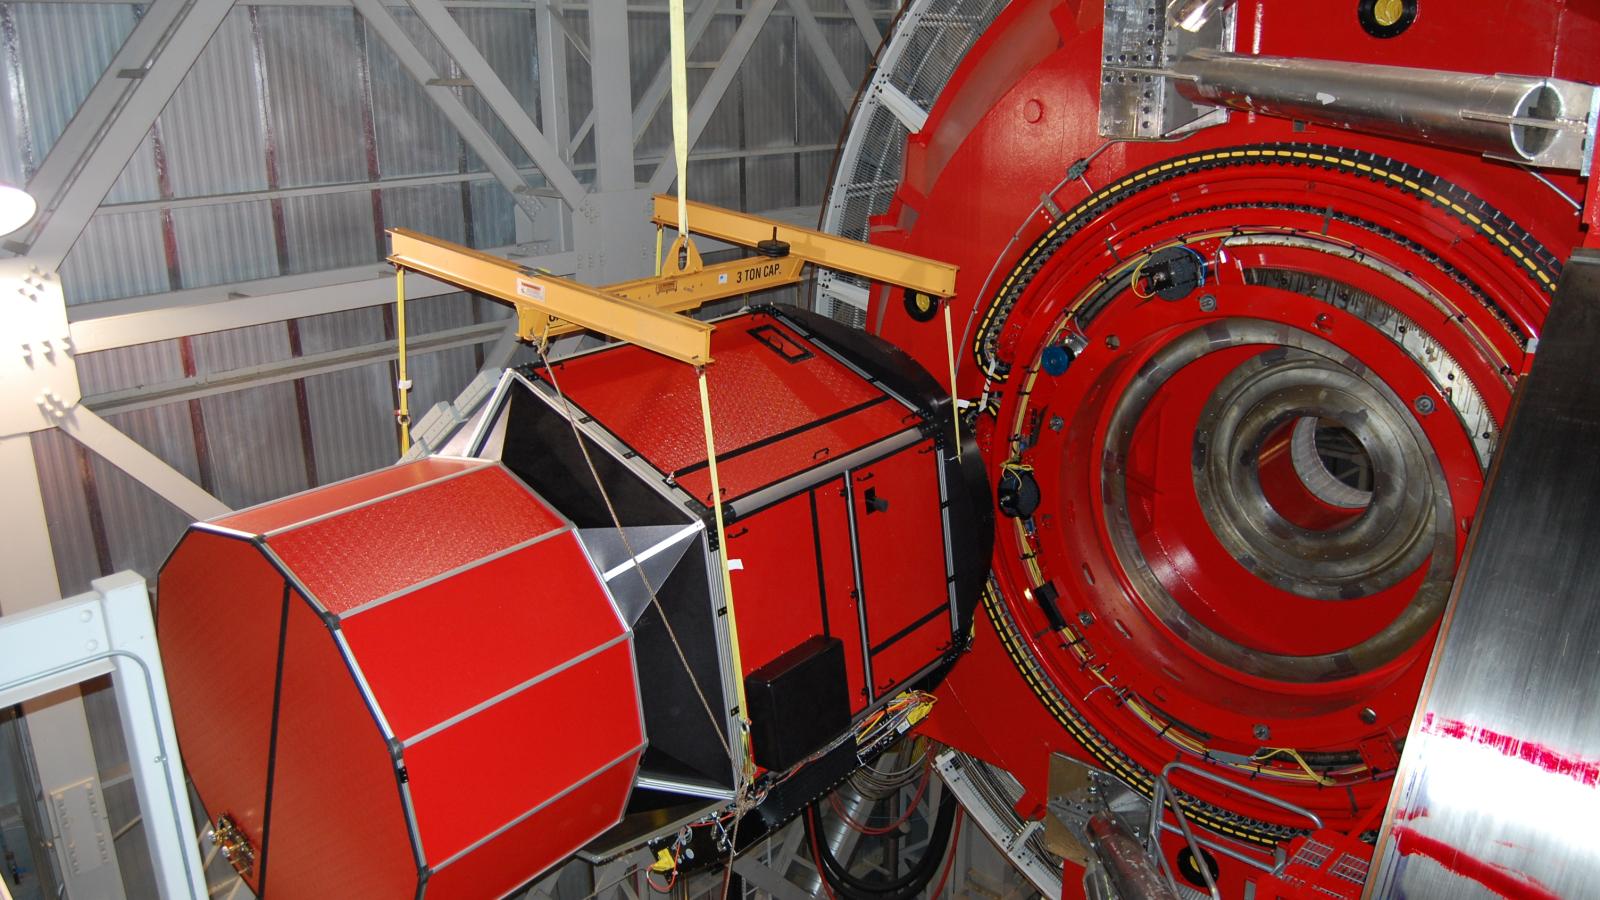 MODS1 being installed at the Large Binocular Telescope